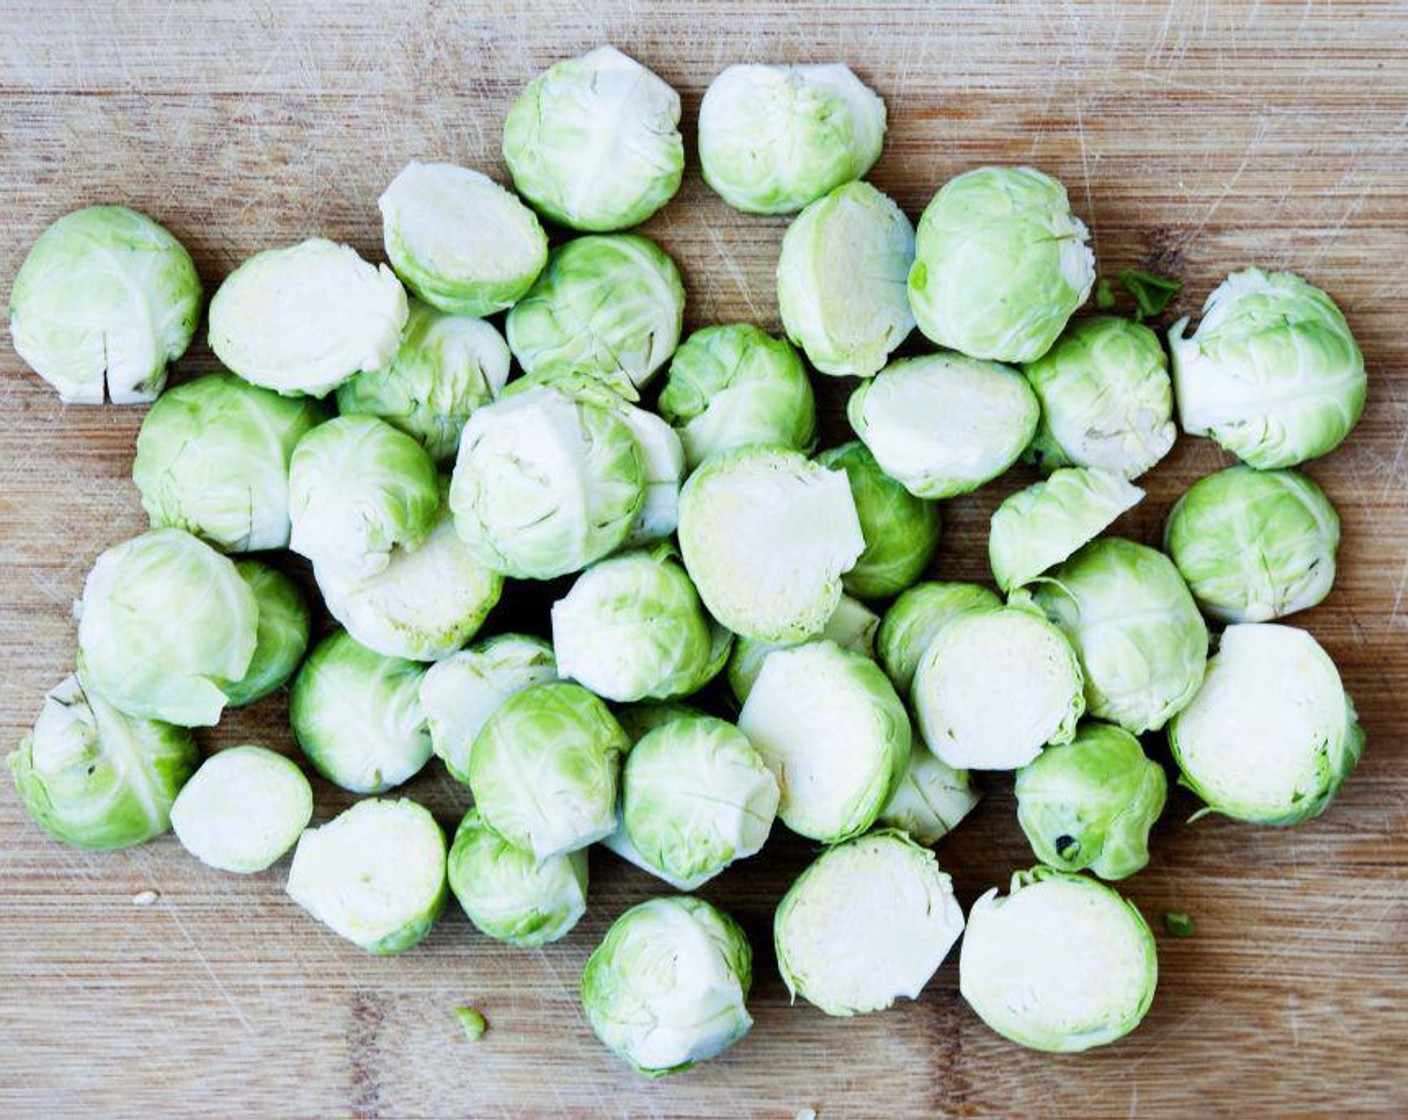 step 2 Wash and cut Brussels Sprouts (2 cups) in half.